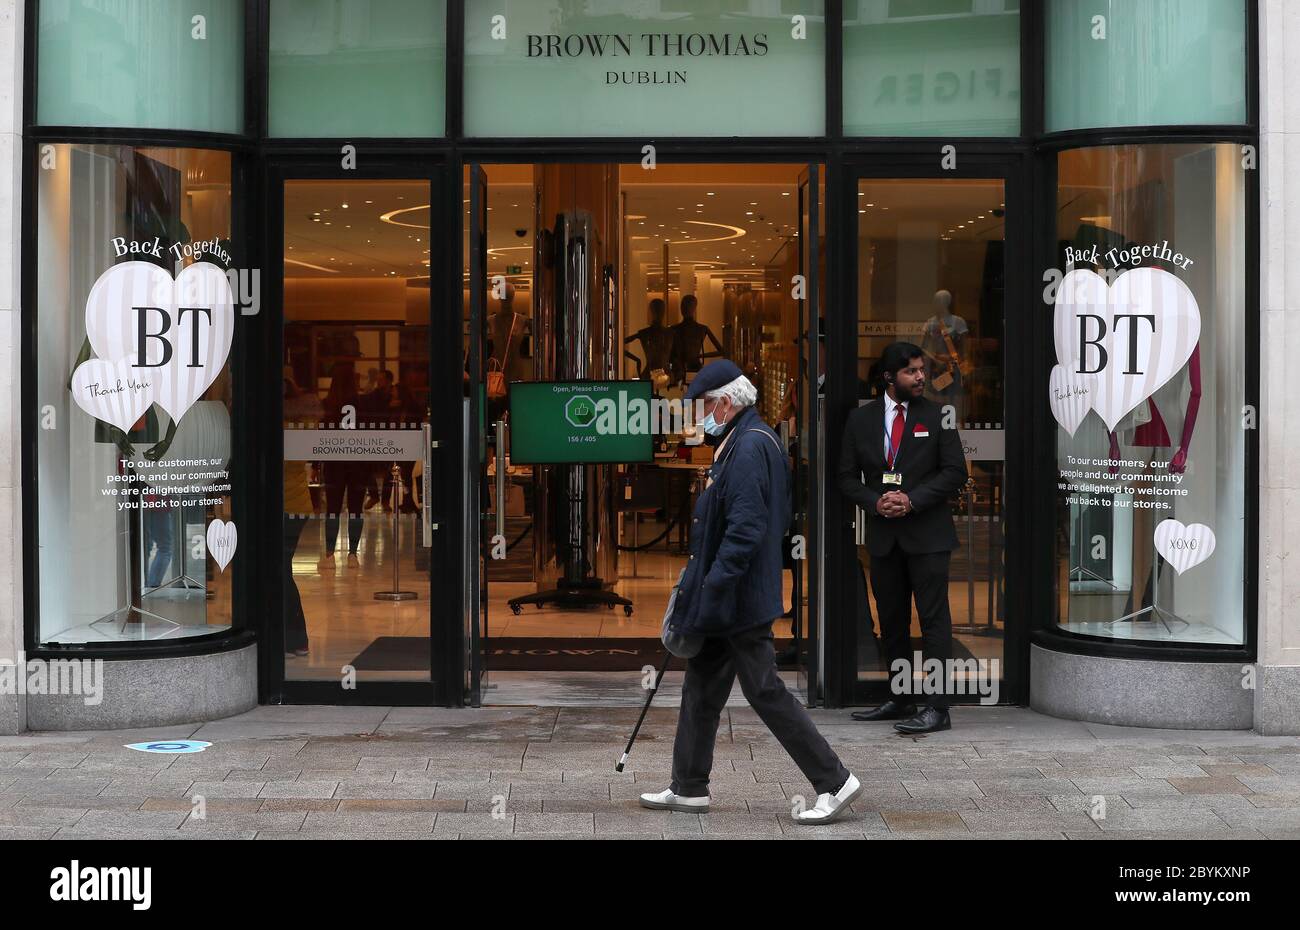 People Walk Past By Brown Thomas Editorial Stock Photo - Stock